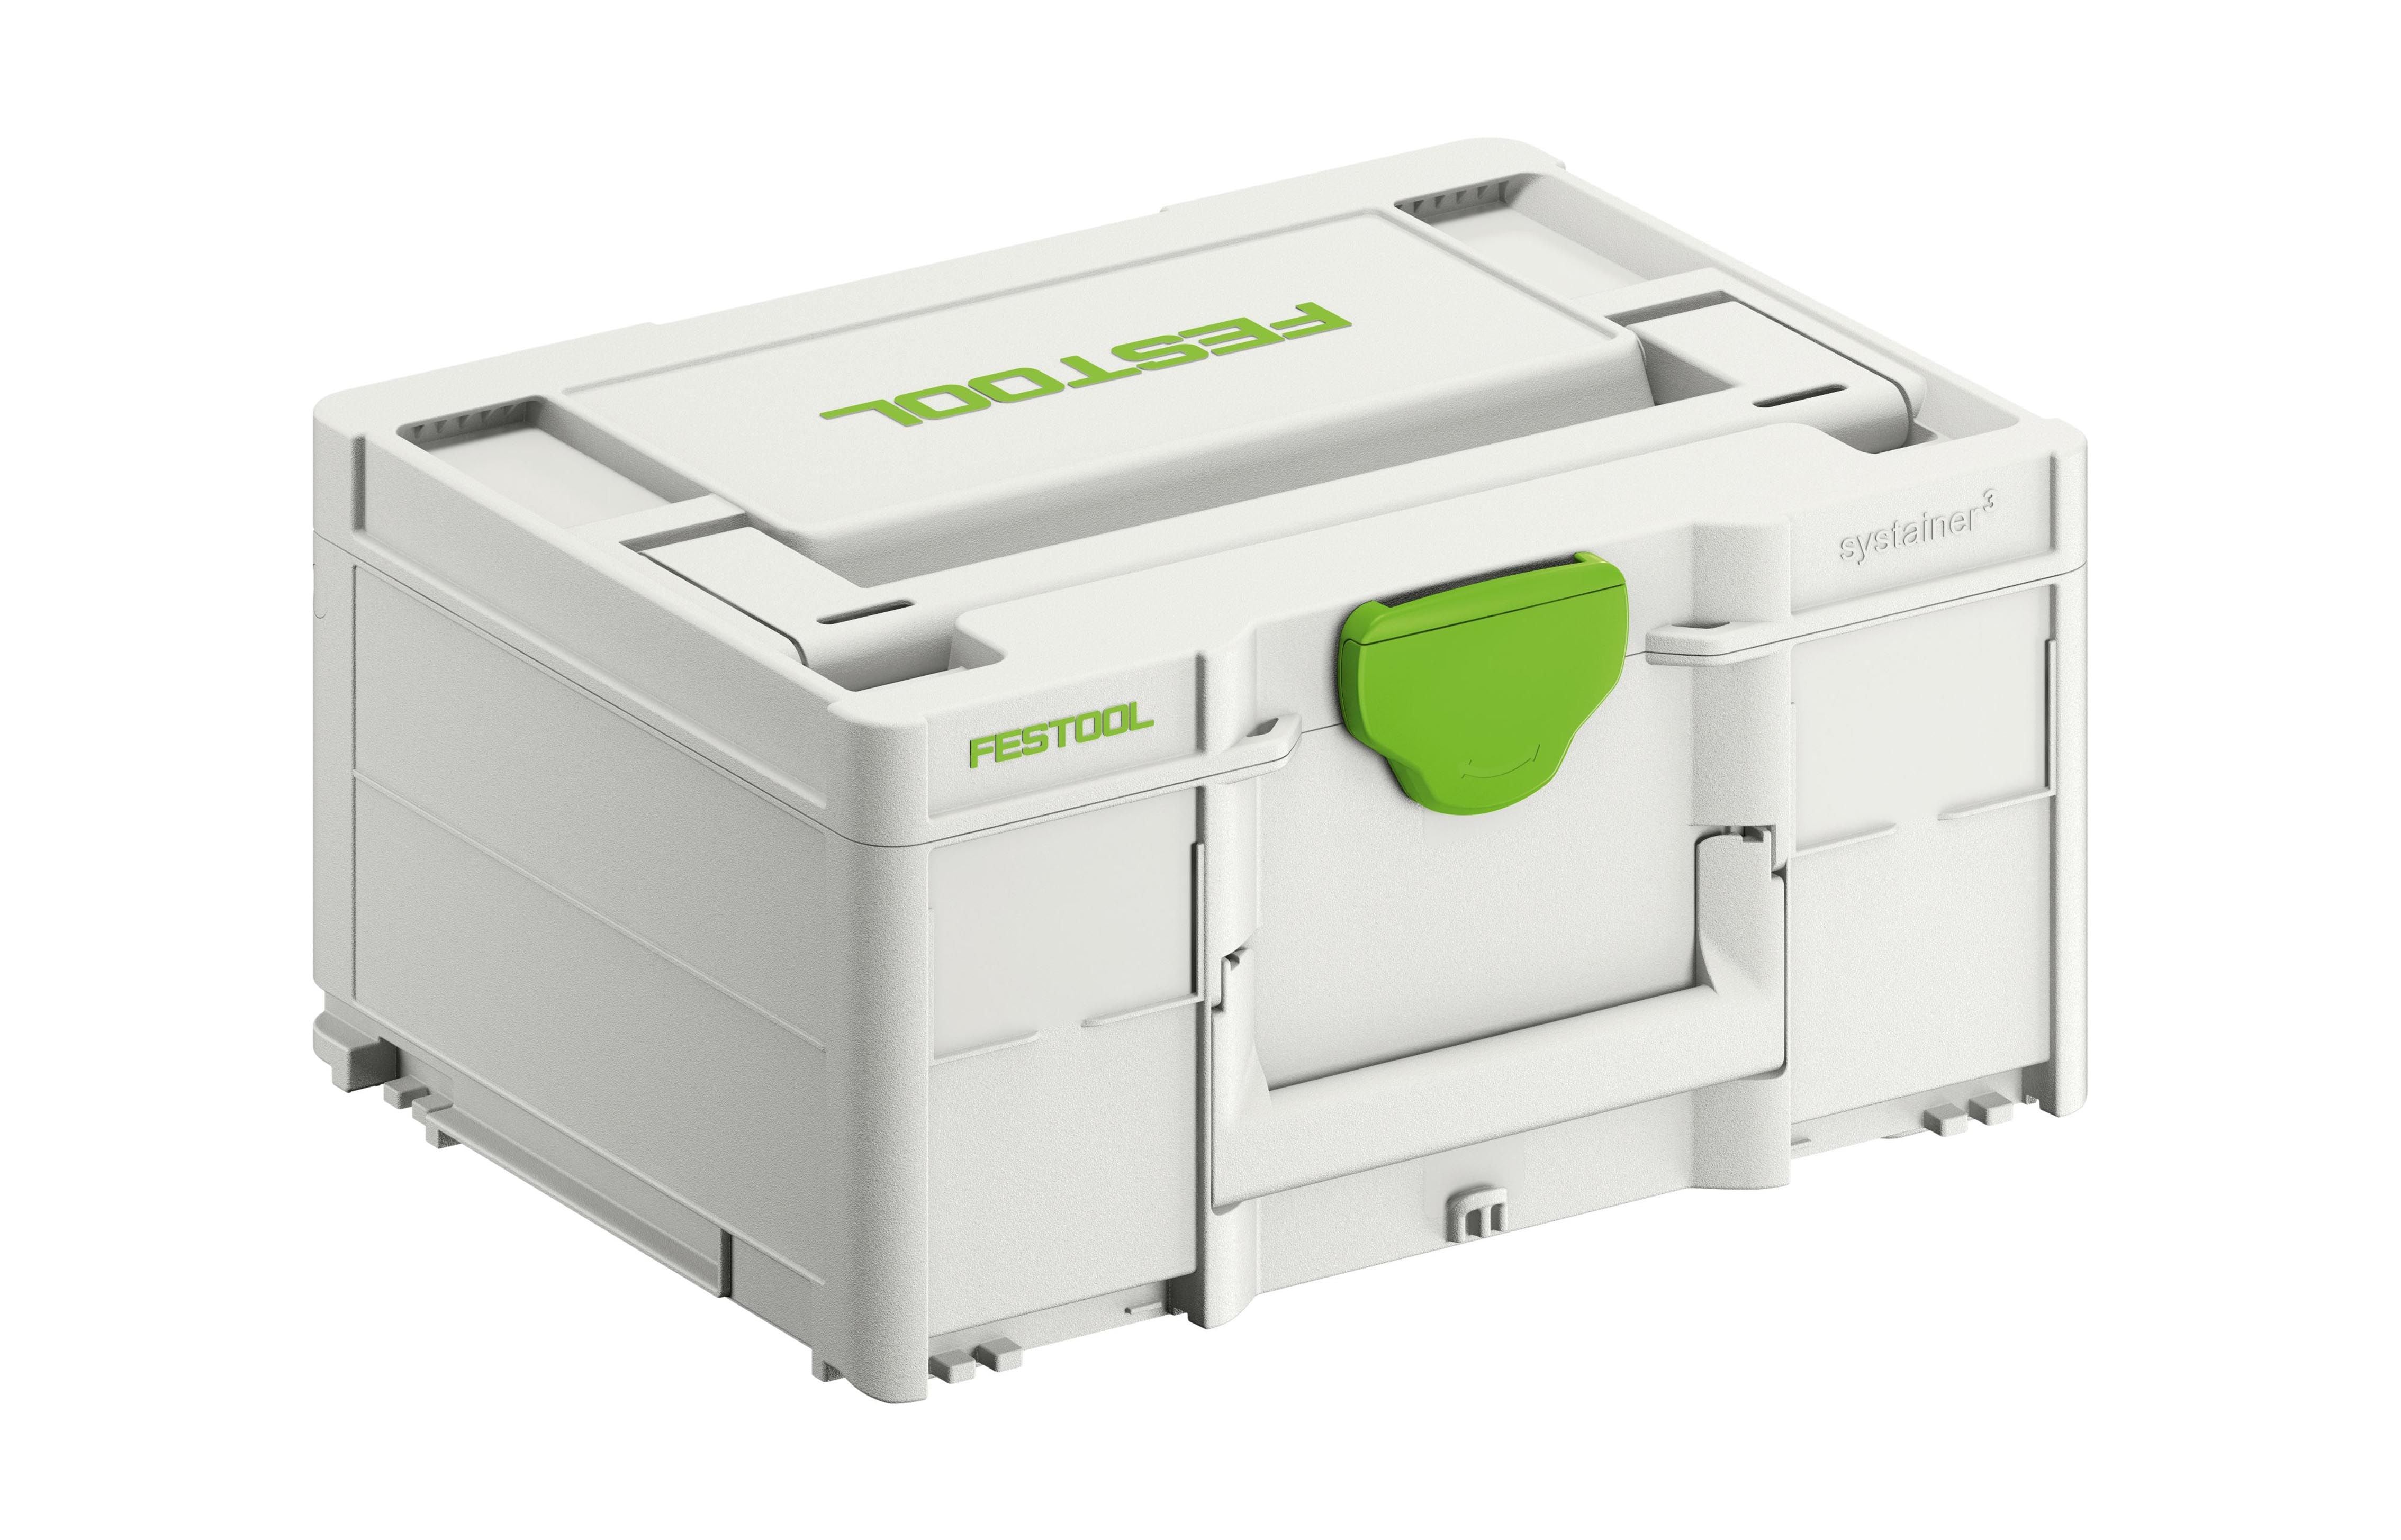 Mobile 4 Piece Systainer System F28737 By Festool